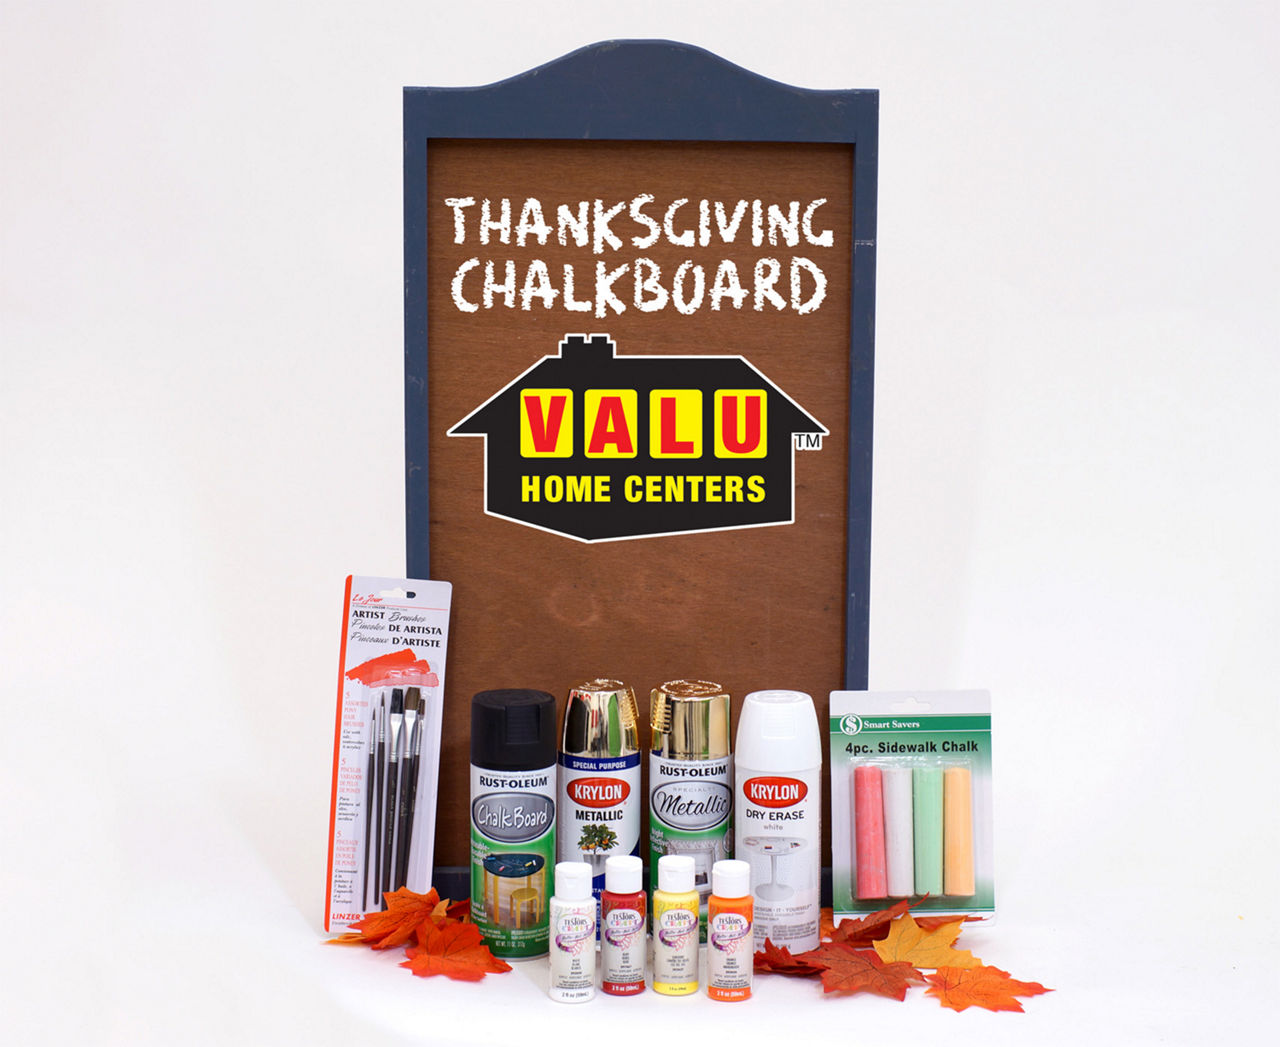 All of the materials you need for the thanksgiving chalkboard